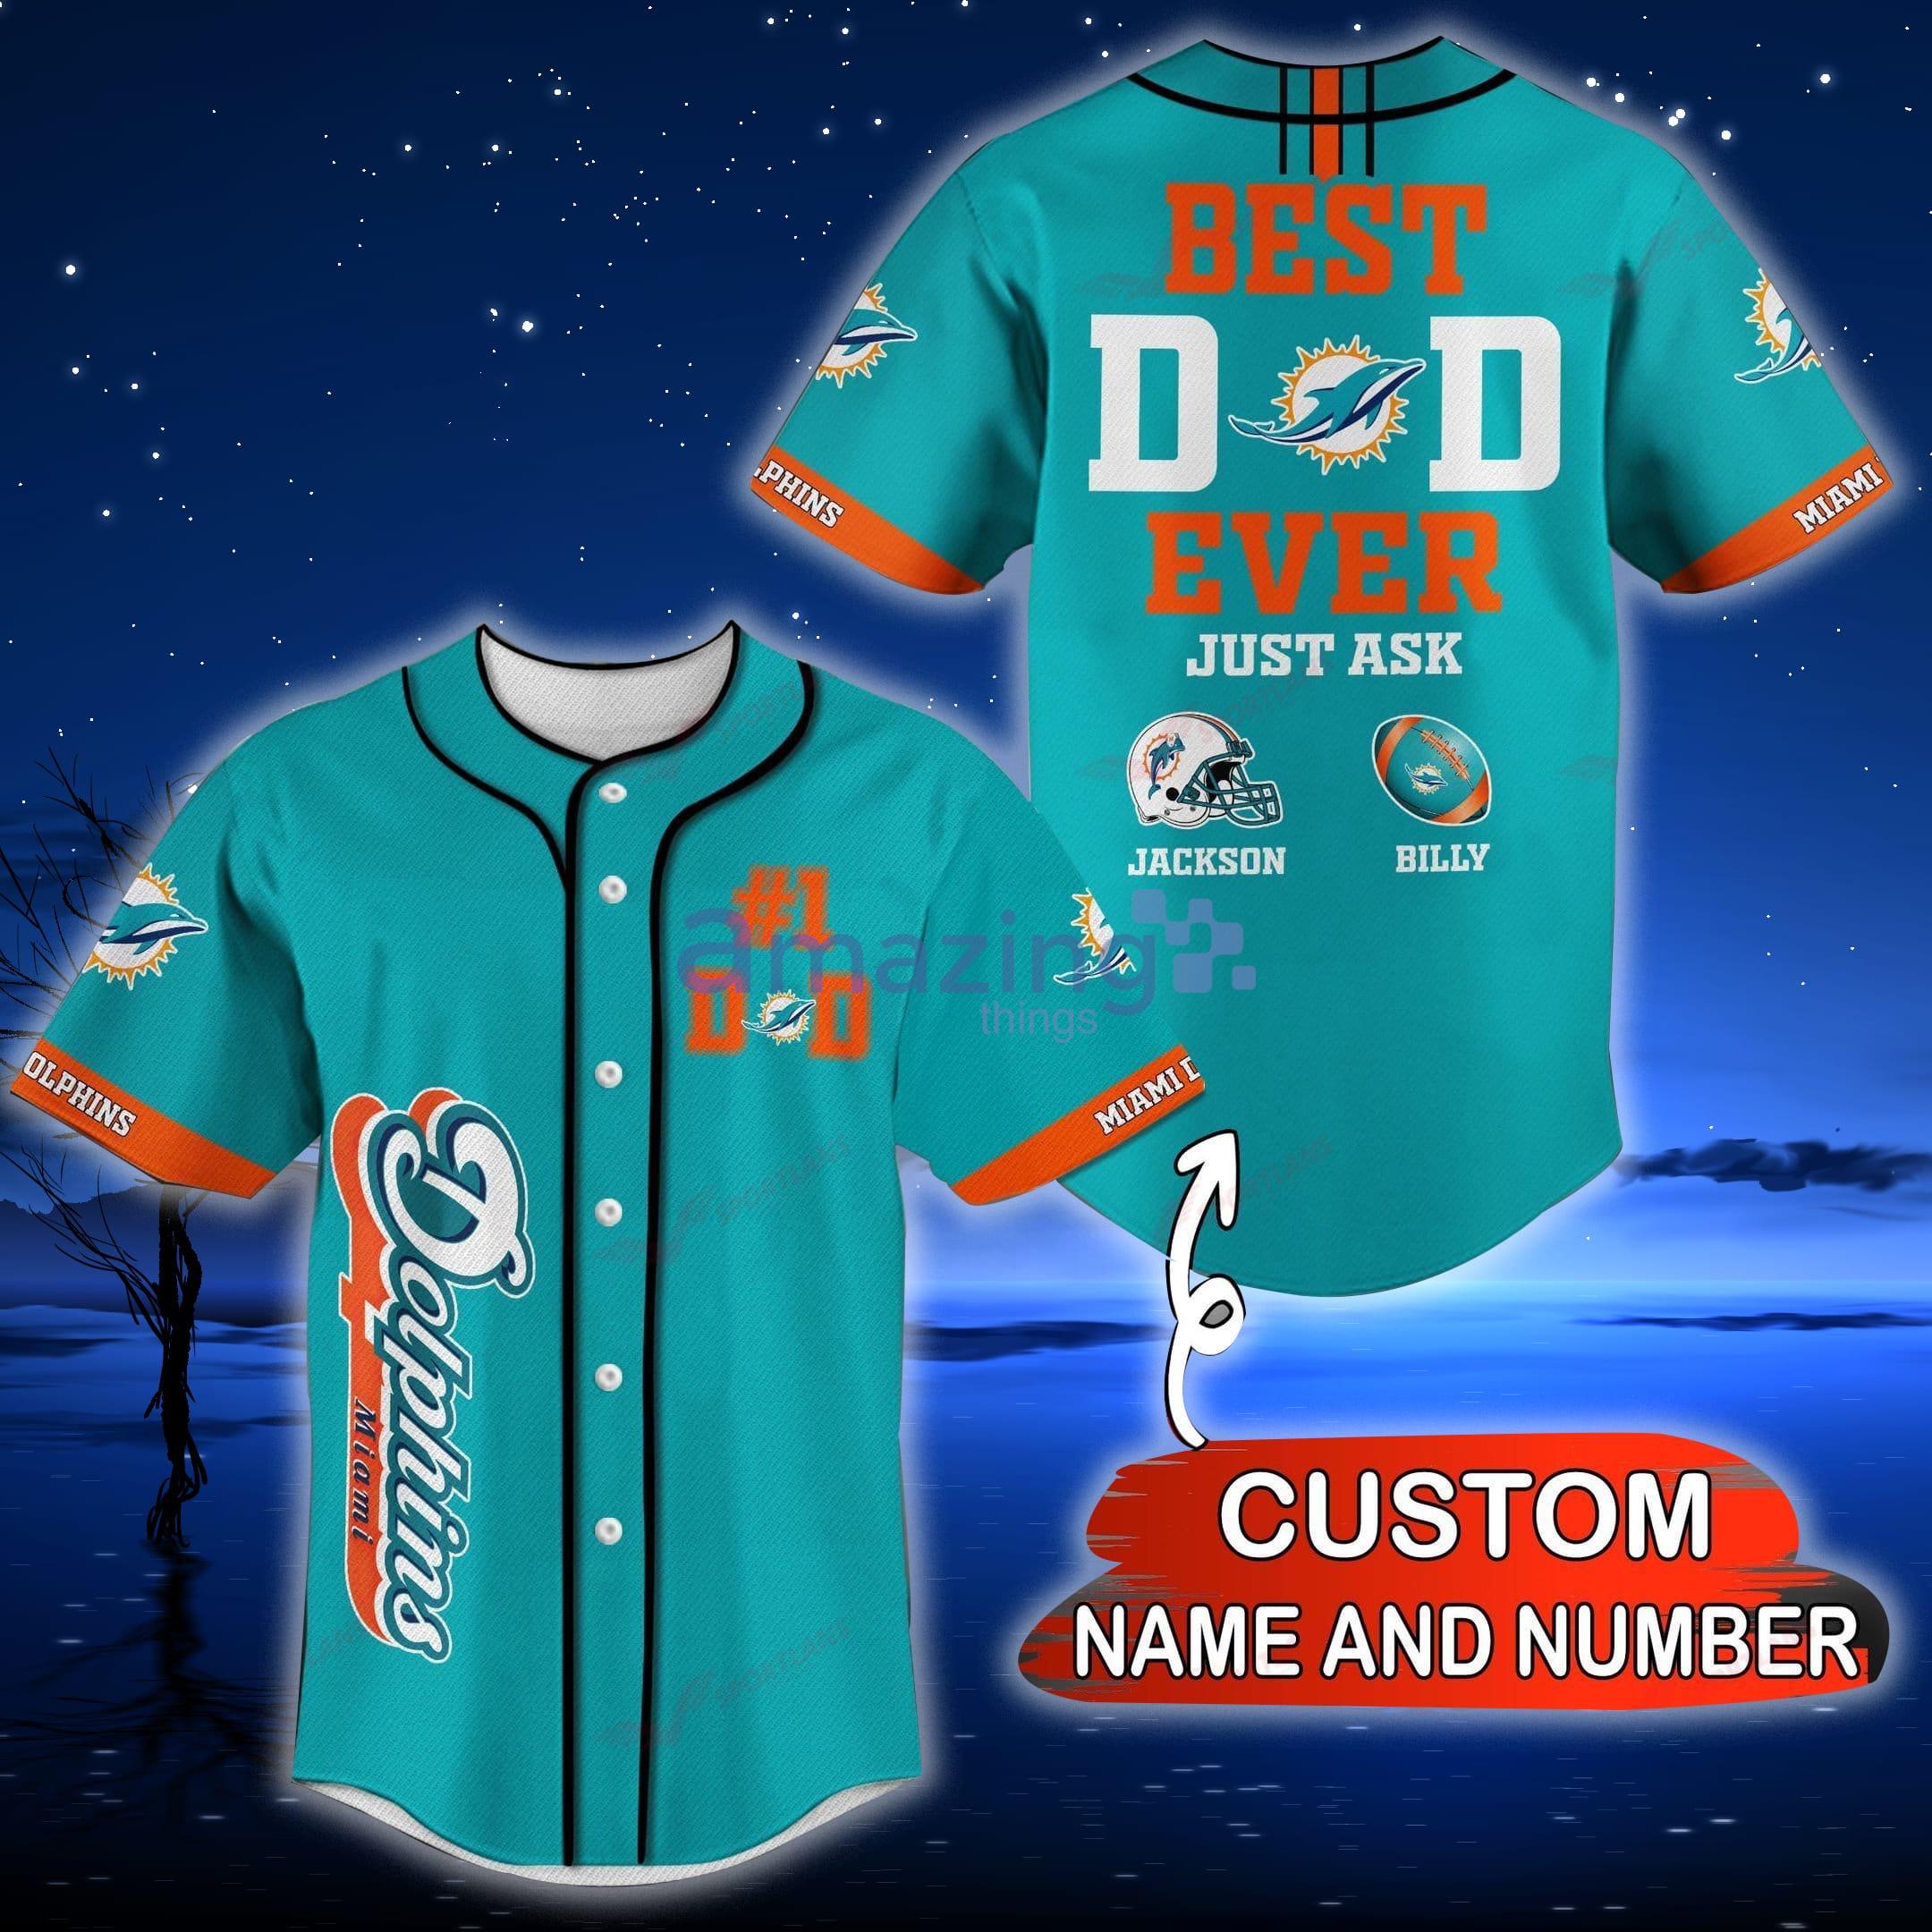 Miami Dolphins 3D Baseball Jersey Shirt - Bring Your Ideas